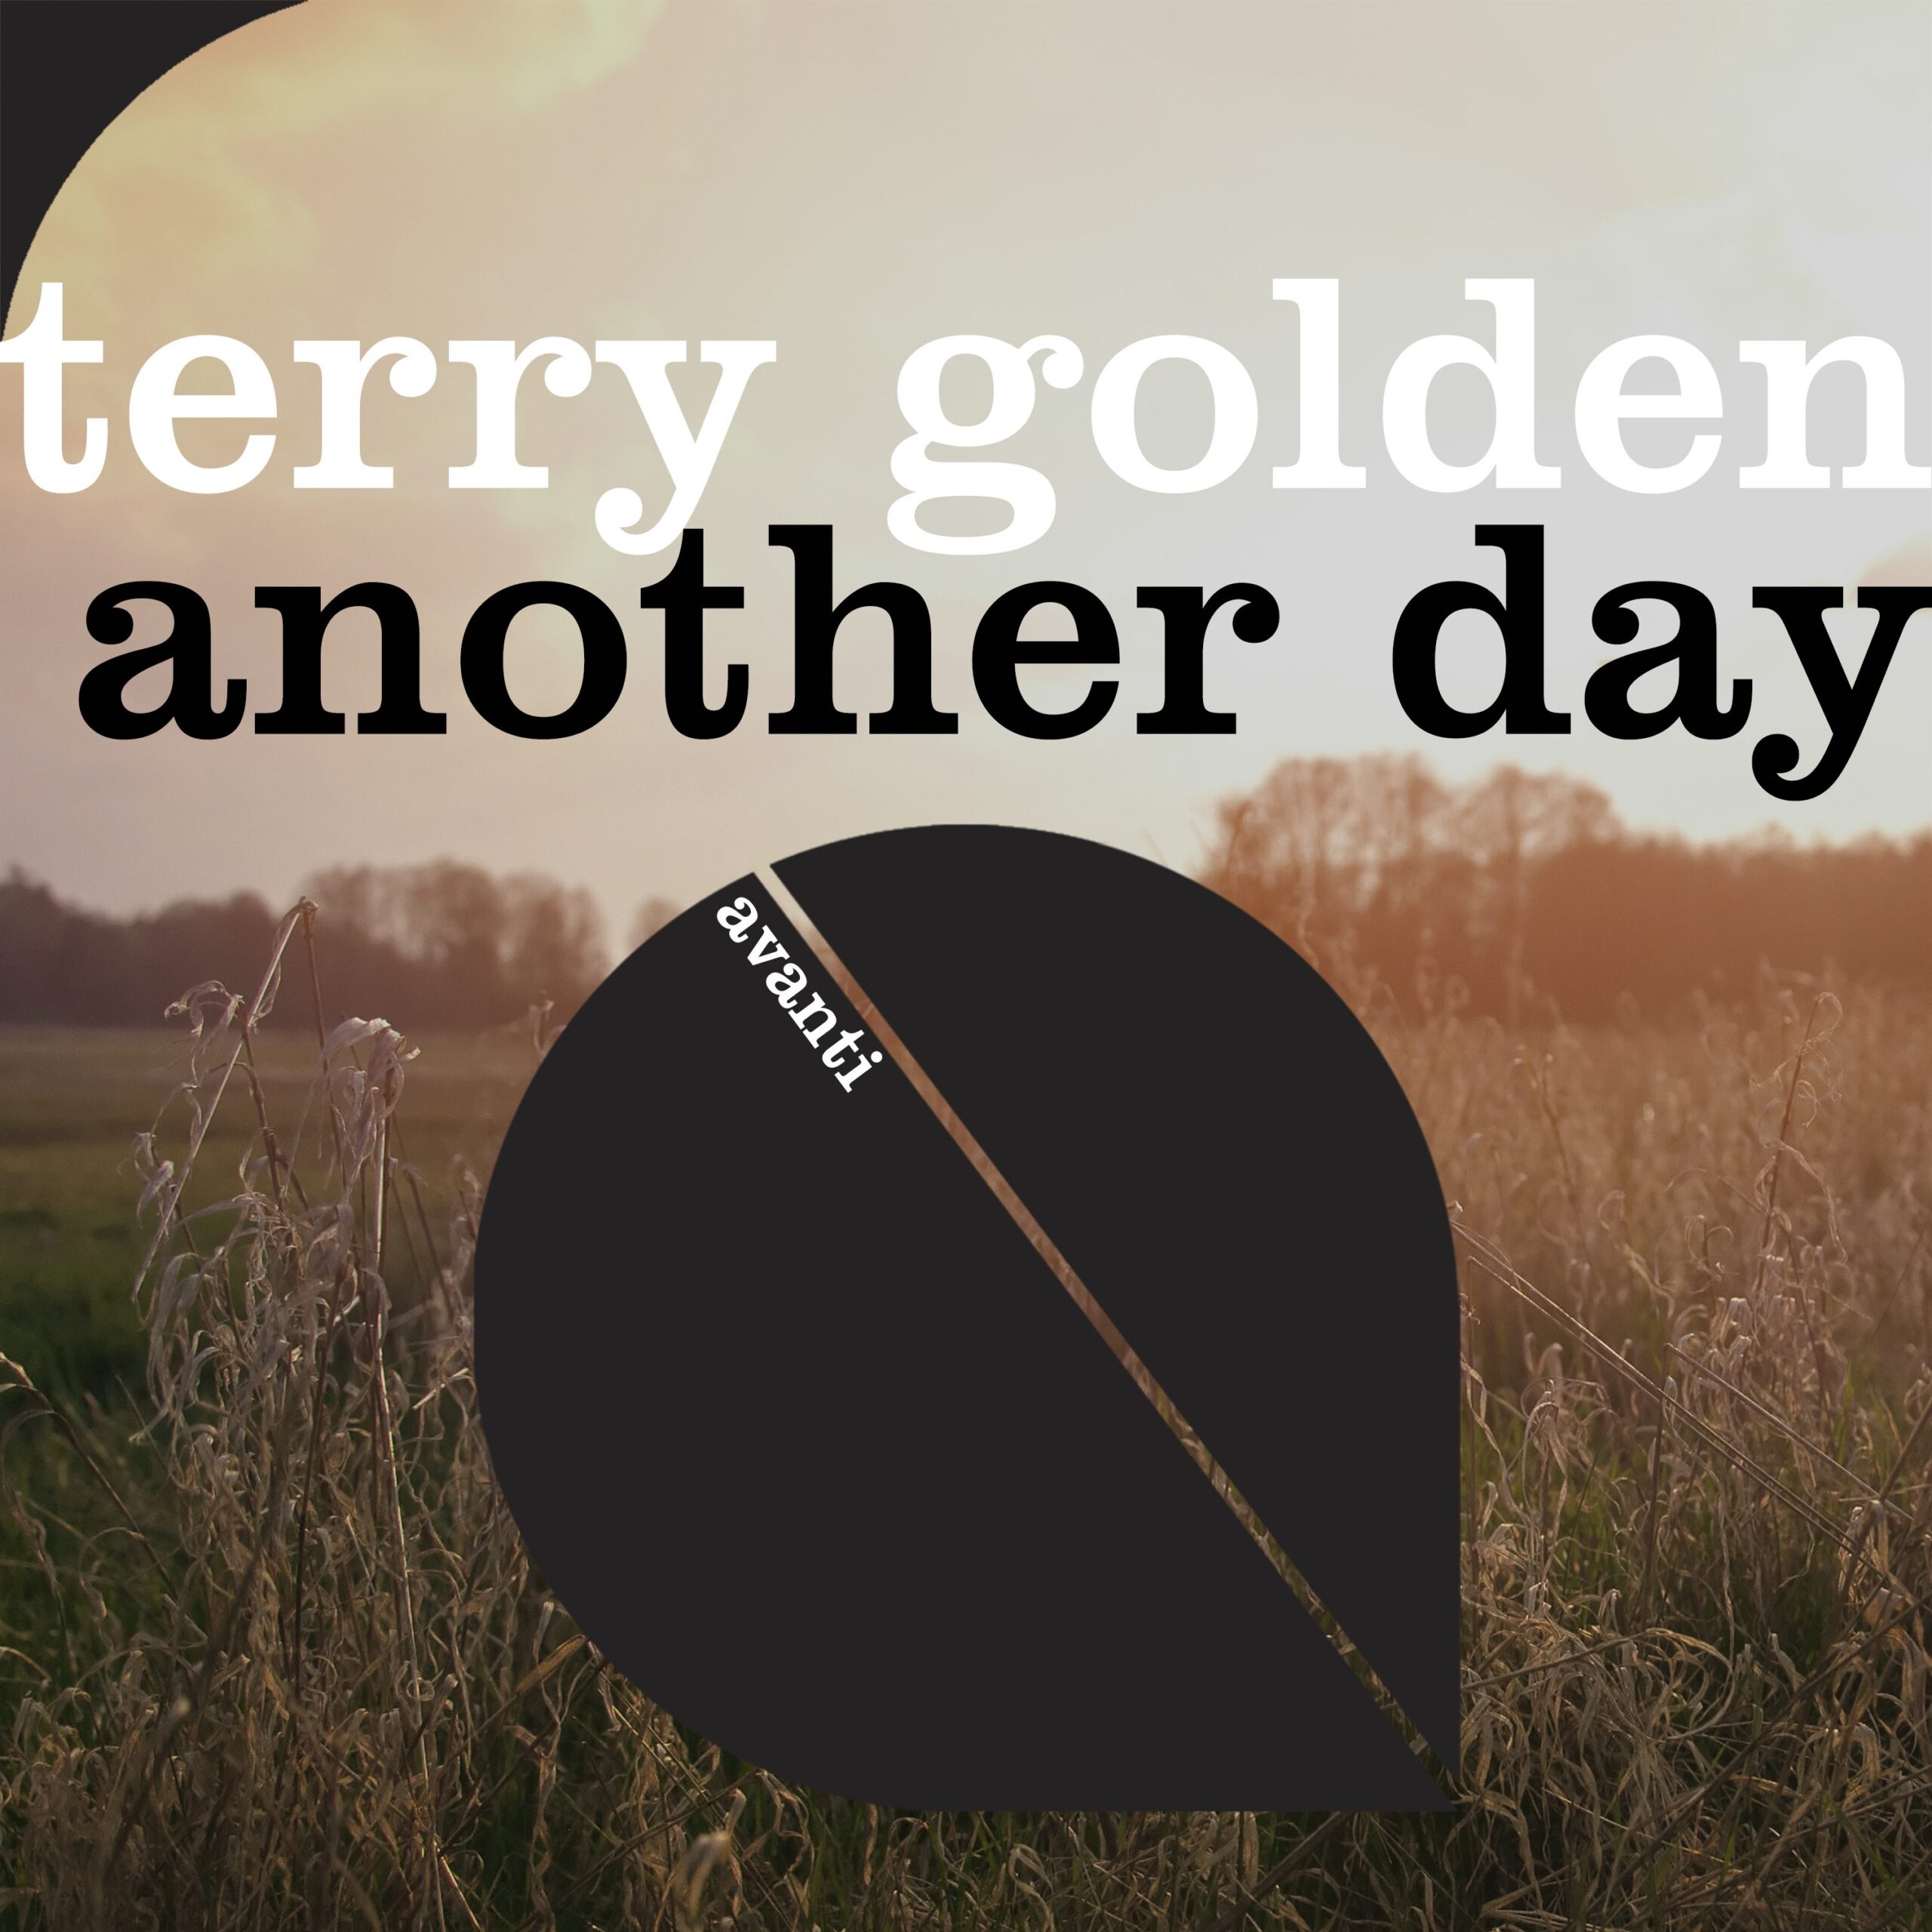 Terry Golden Unleashes His Hard-Hitting Sound in Latest Release 'Another Day'